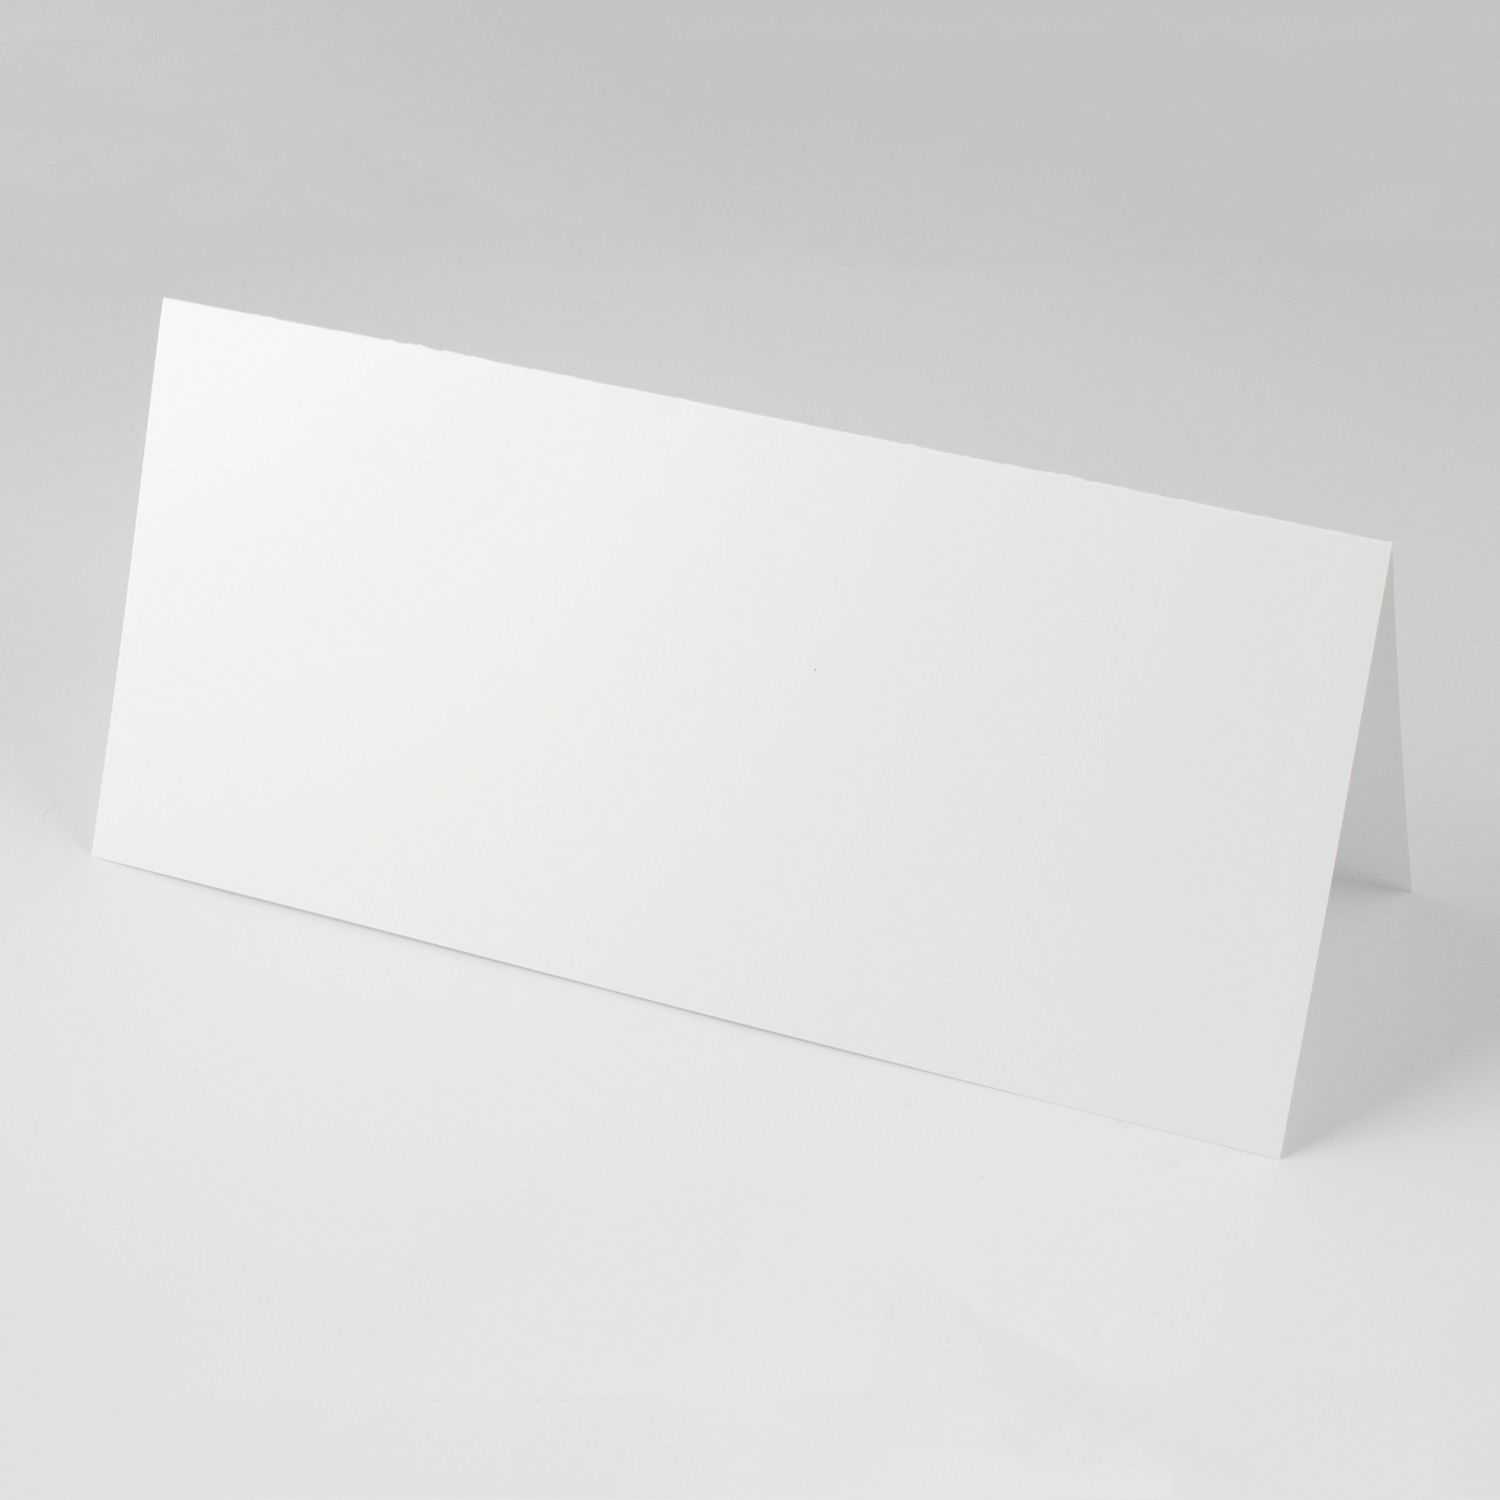 12" X 5 1/2" Extra Large Nametent, Blank, Pack Of 50 Nametents Regarding Imprintable Place Cards Template